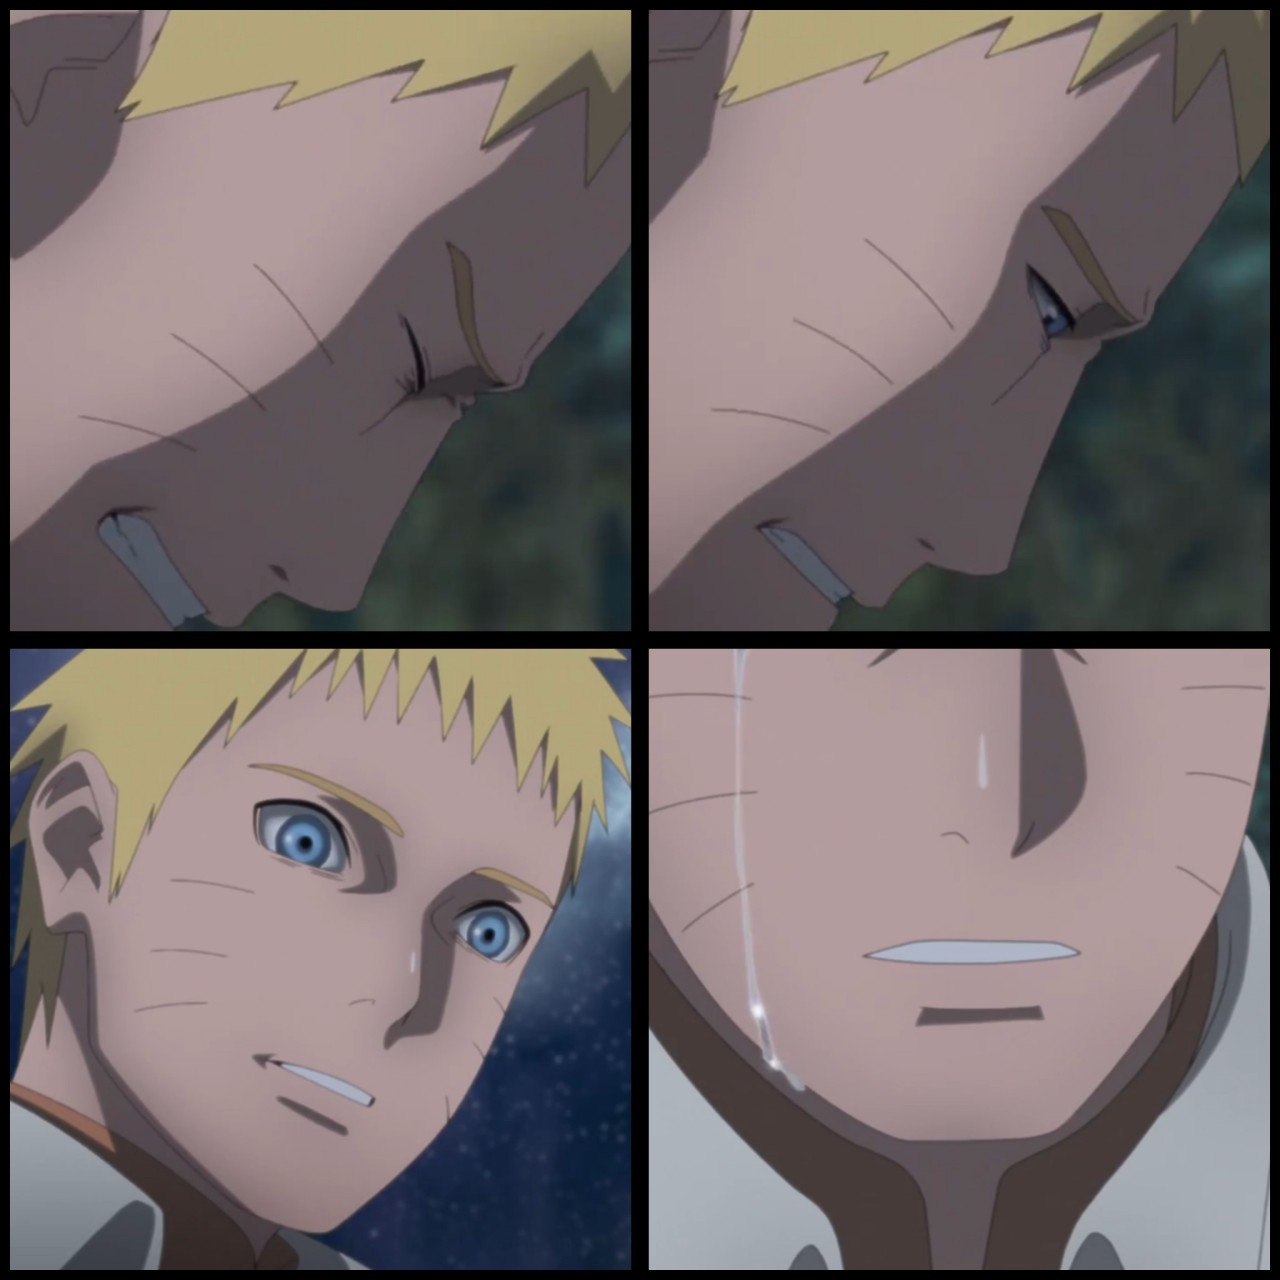 Boruto: Naruto Next Generations Episode 293: What to Expect from